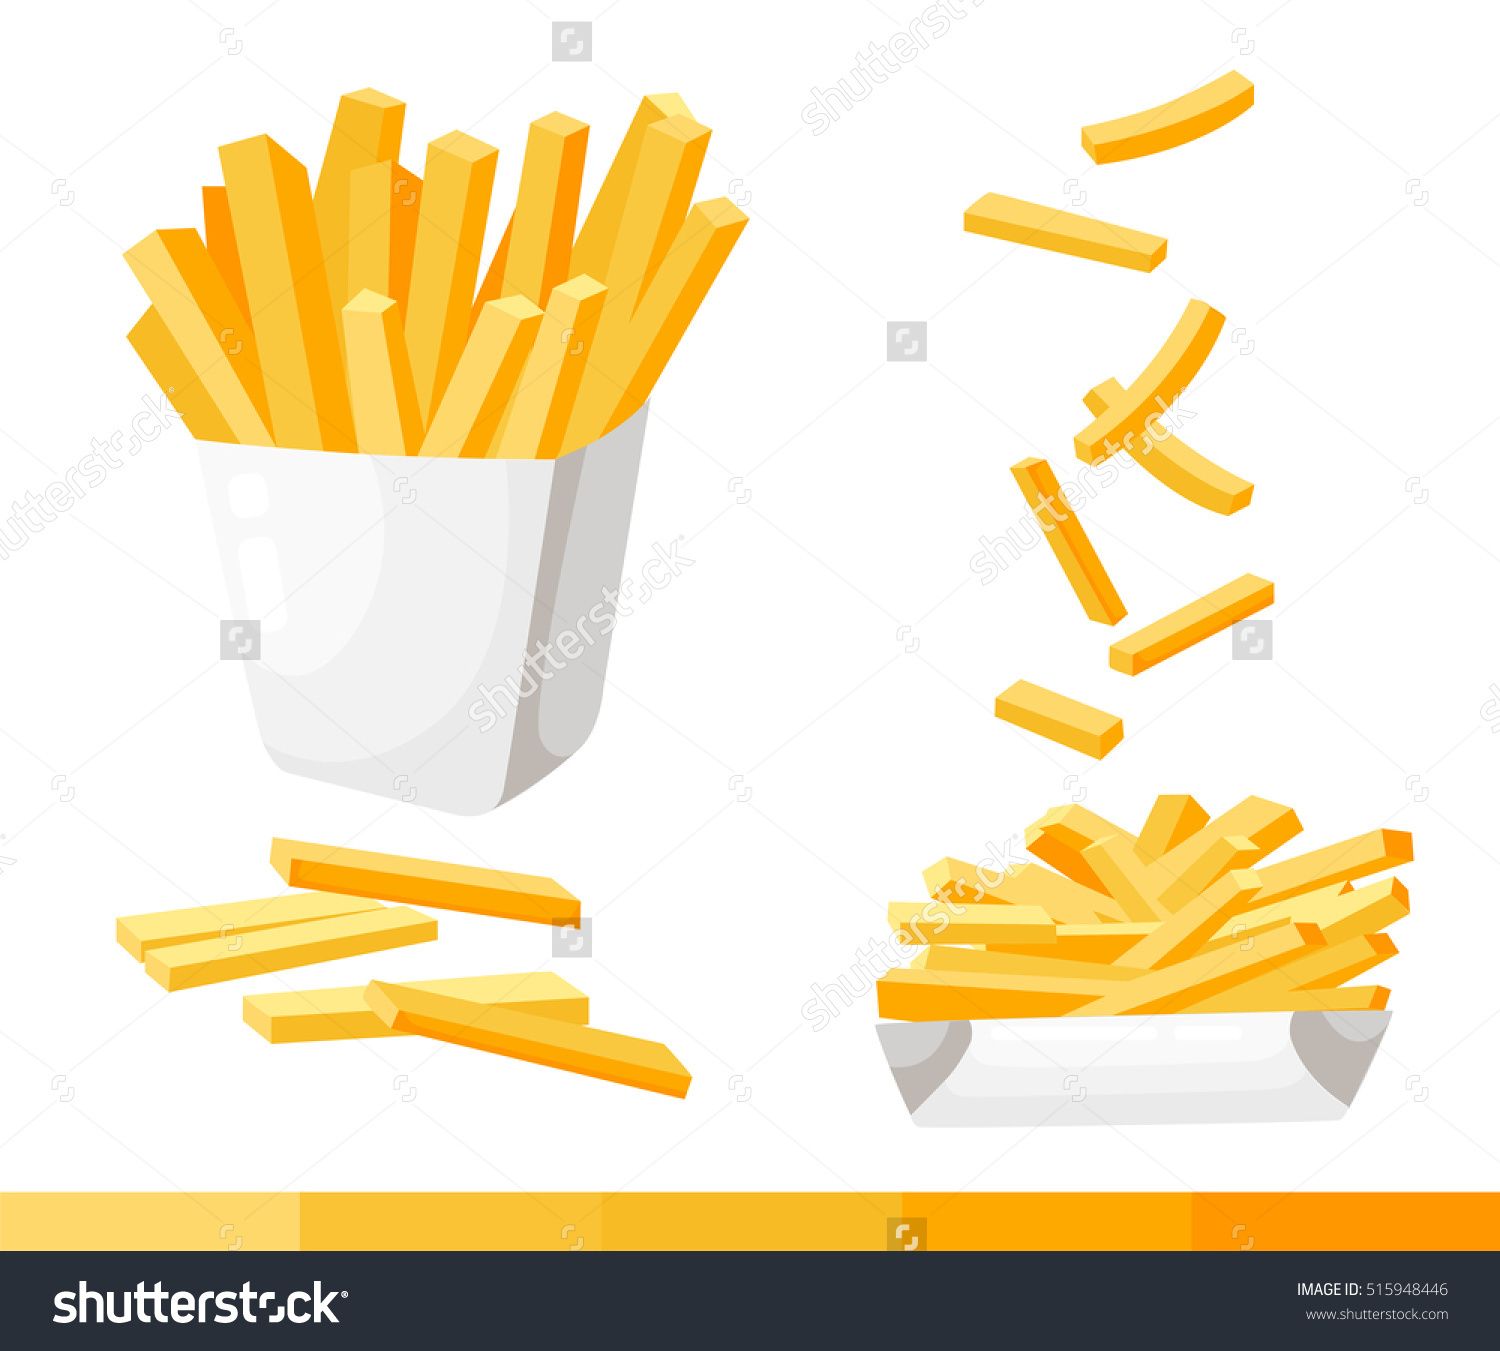 fries clipart fry box